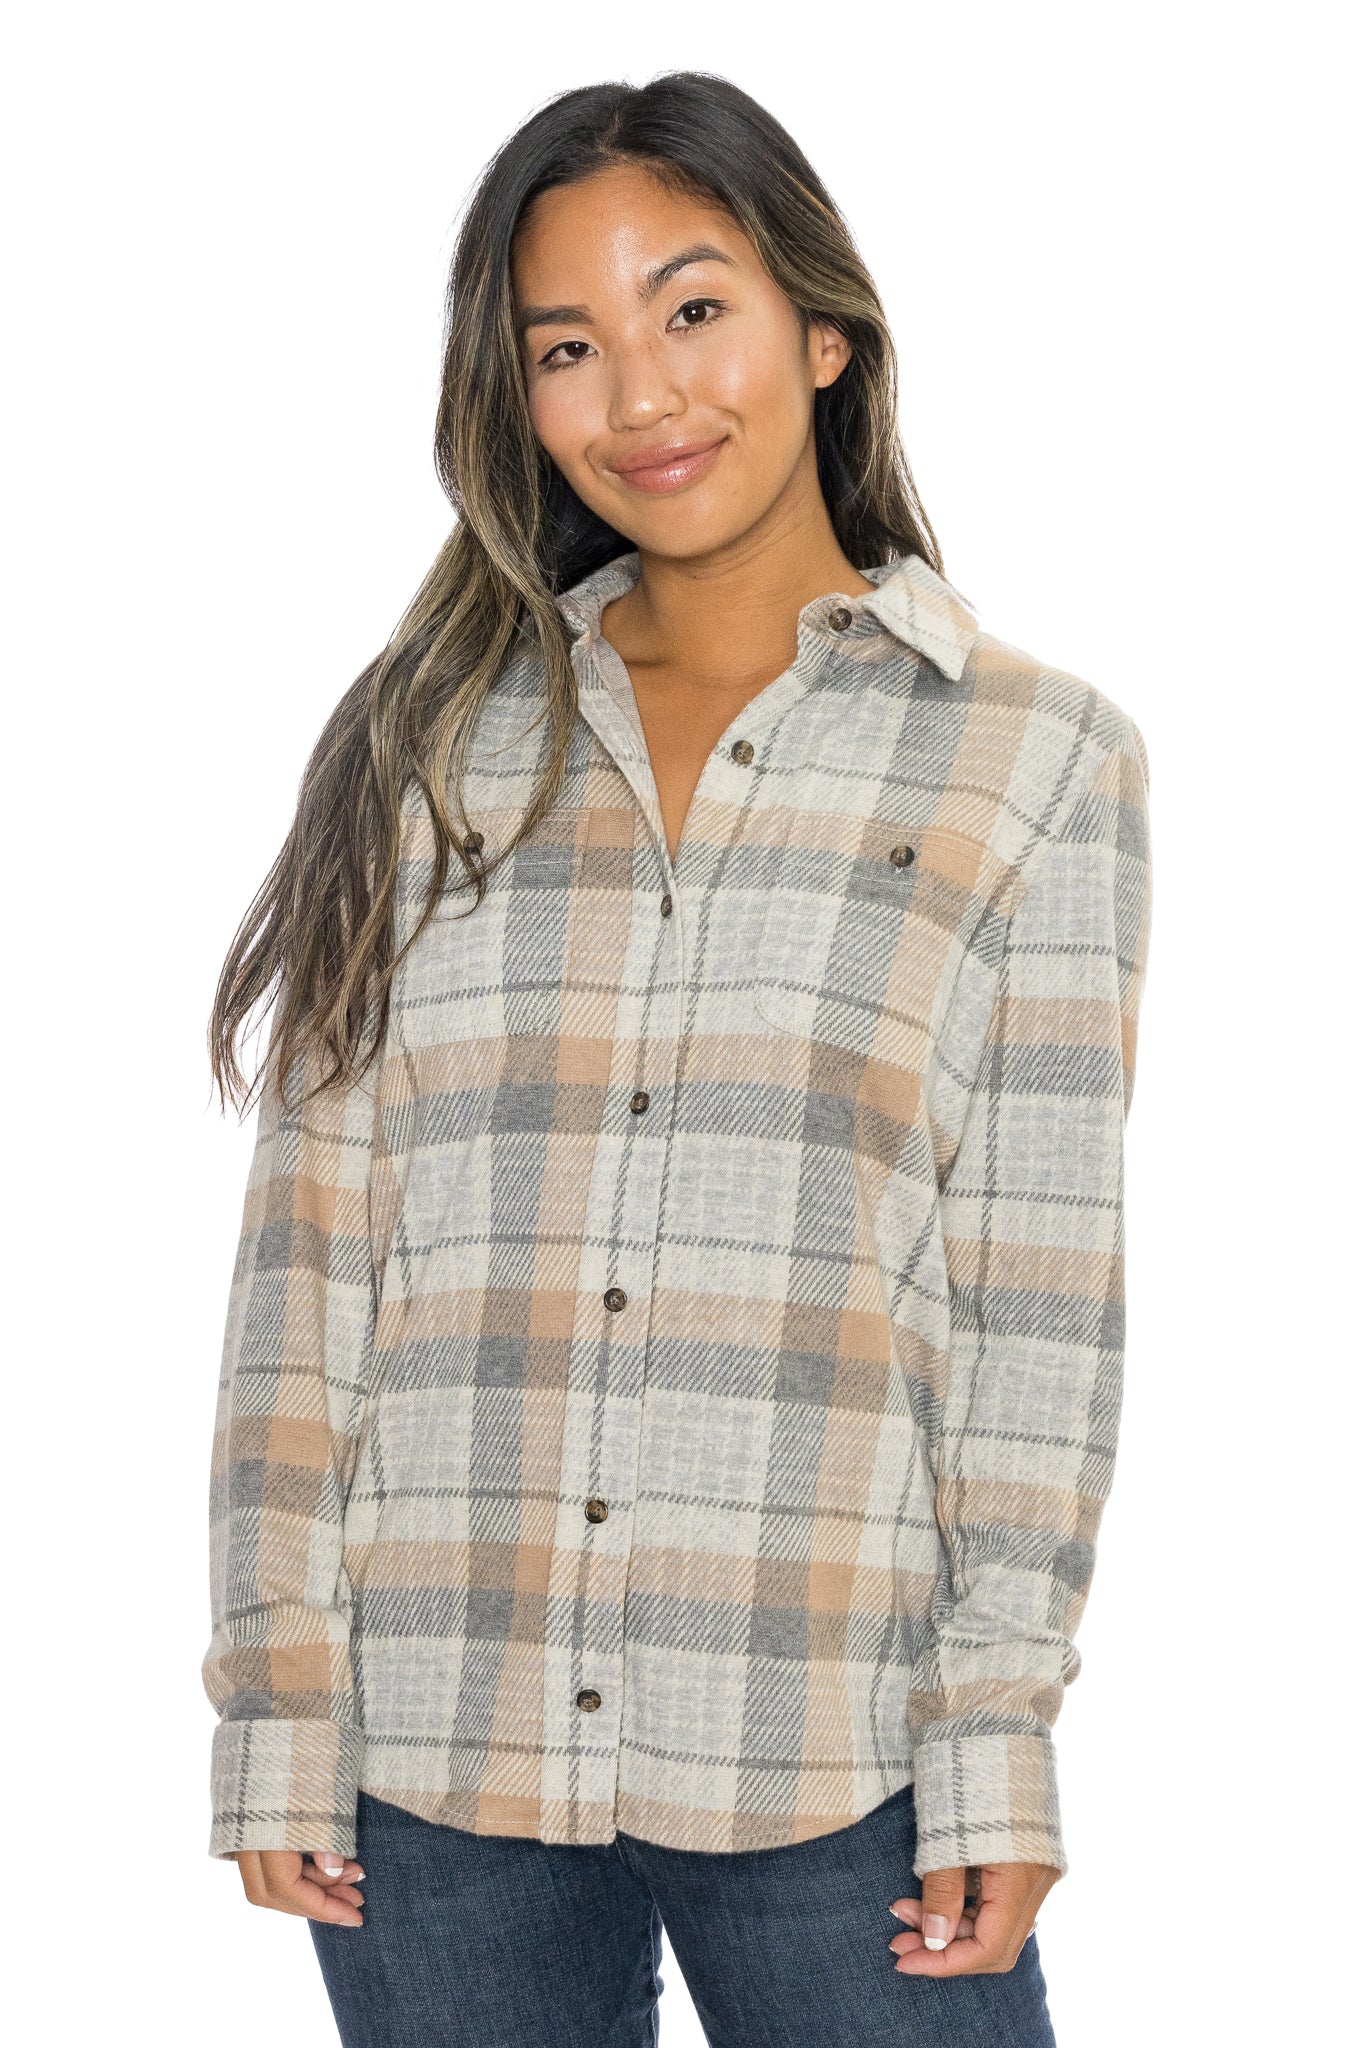 Legend Sweater Shirt in Western Outpost Plaid